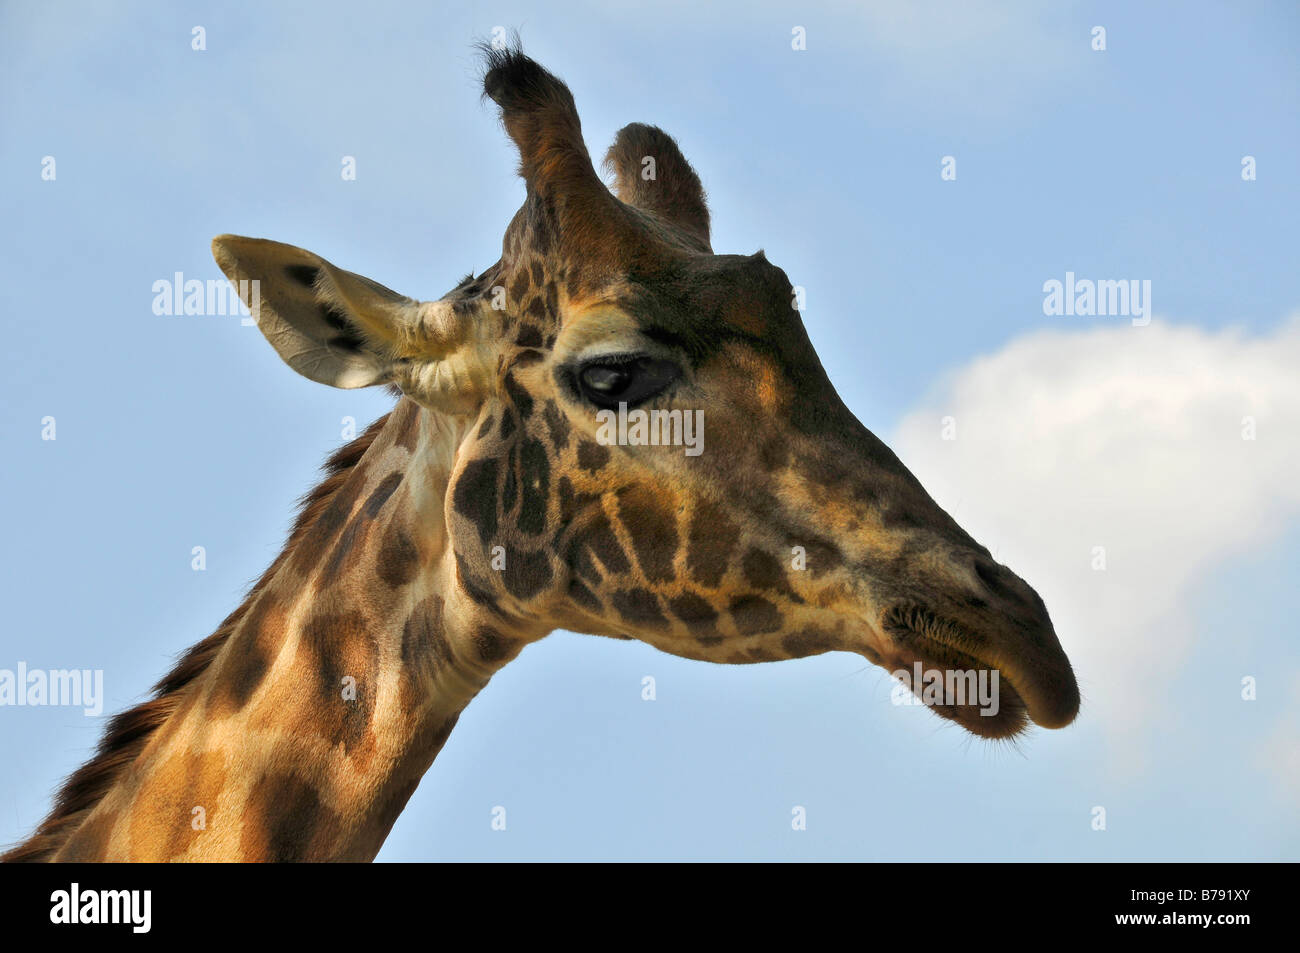 giraffes head against blue sky showing great detail of colors and features of this wildlife animal against blue sky Stock Photo